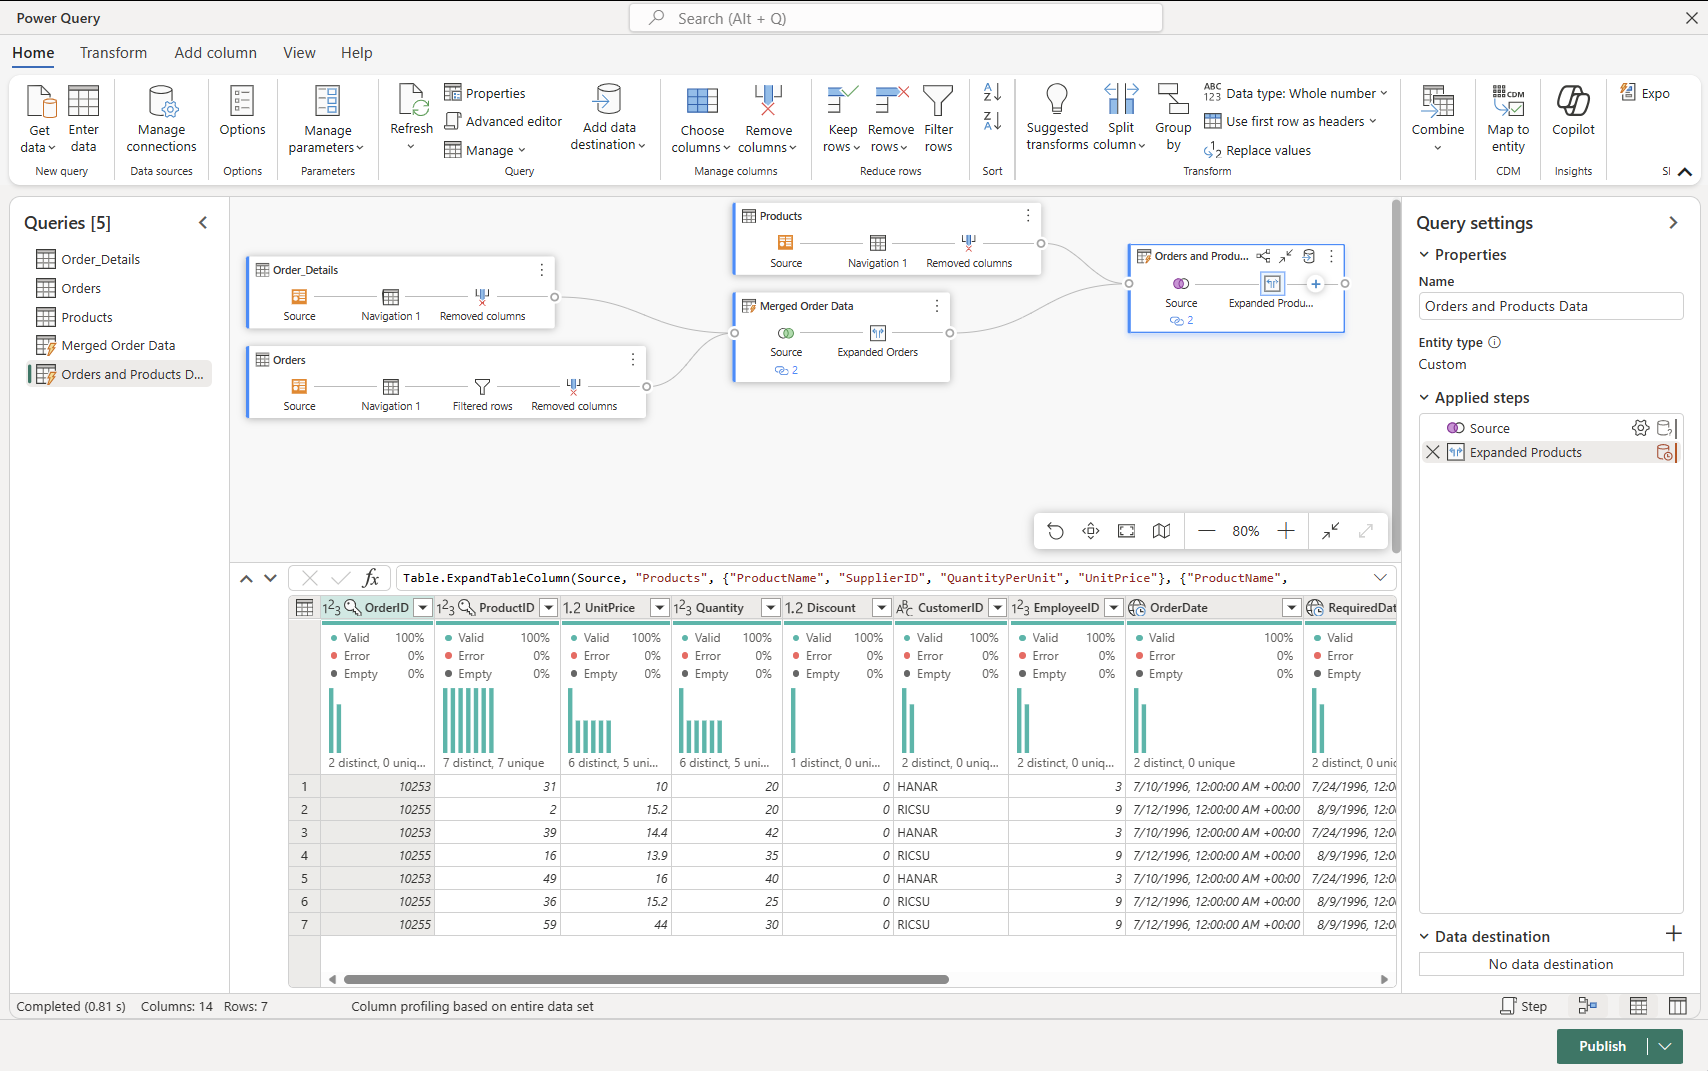 sql server reporting services to power bi